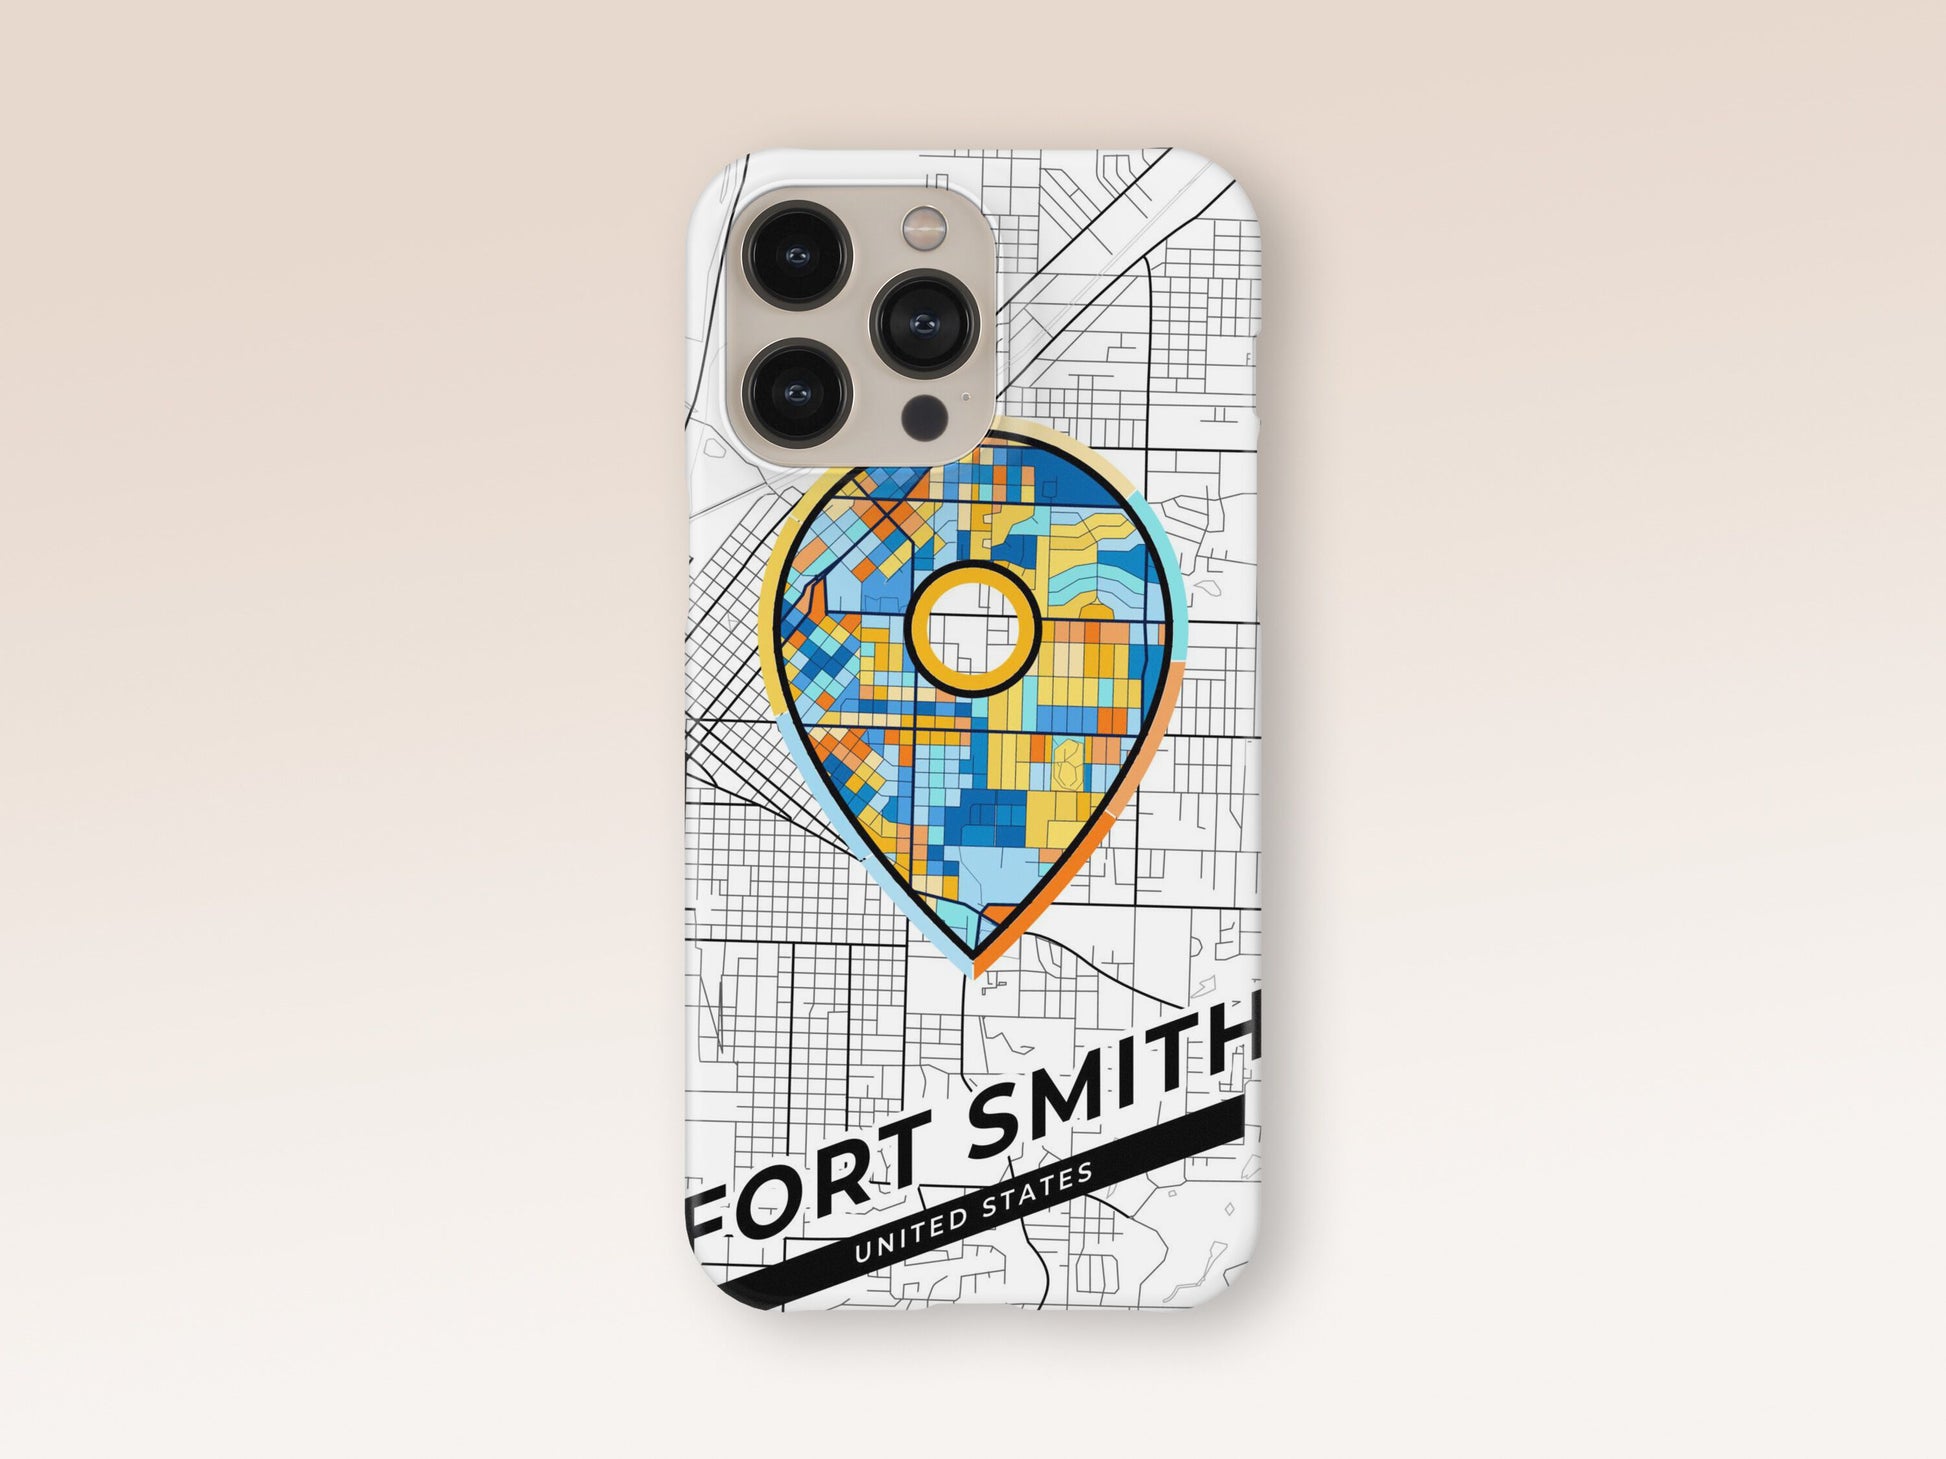 Fort Smith Arkansas slim phone case with colorful icon. Birthday, wedding or housewarming gift. Couple match cases. 1